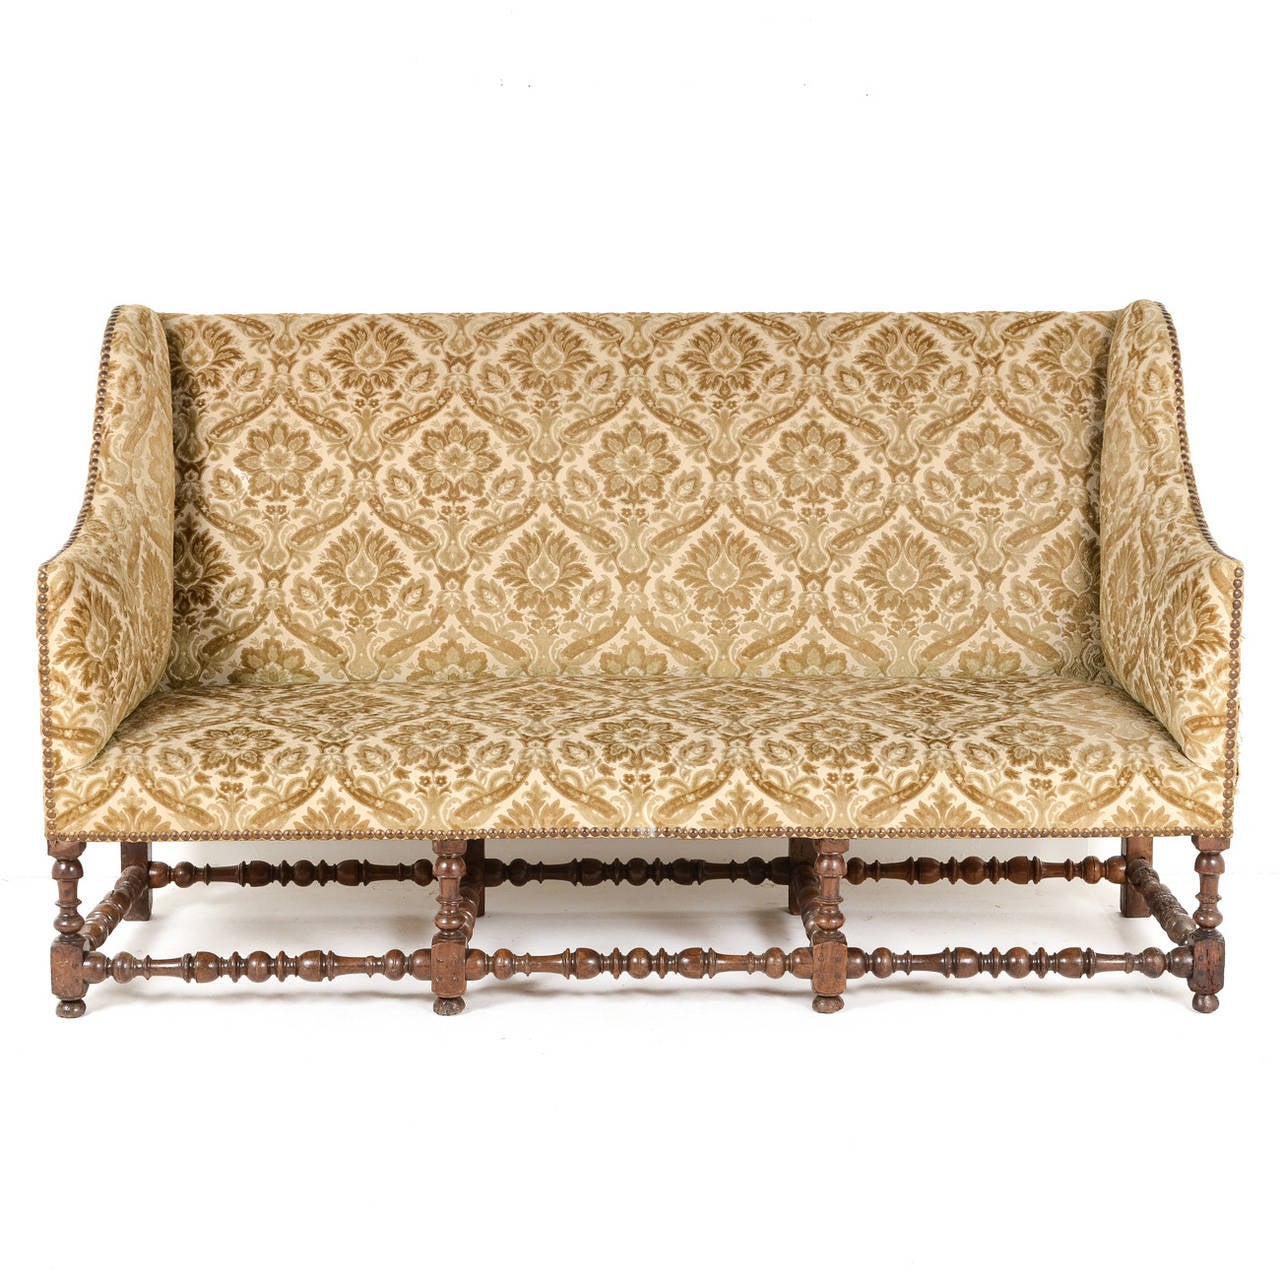 Rare French antique Louis XIII sofa, circa 1630 with turned stretchers and high back. This sofa is structurally sound and is in remarkable condition considering is age. Upholstery is in good condition with individual hammerhead nails.